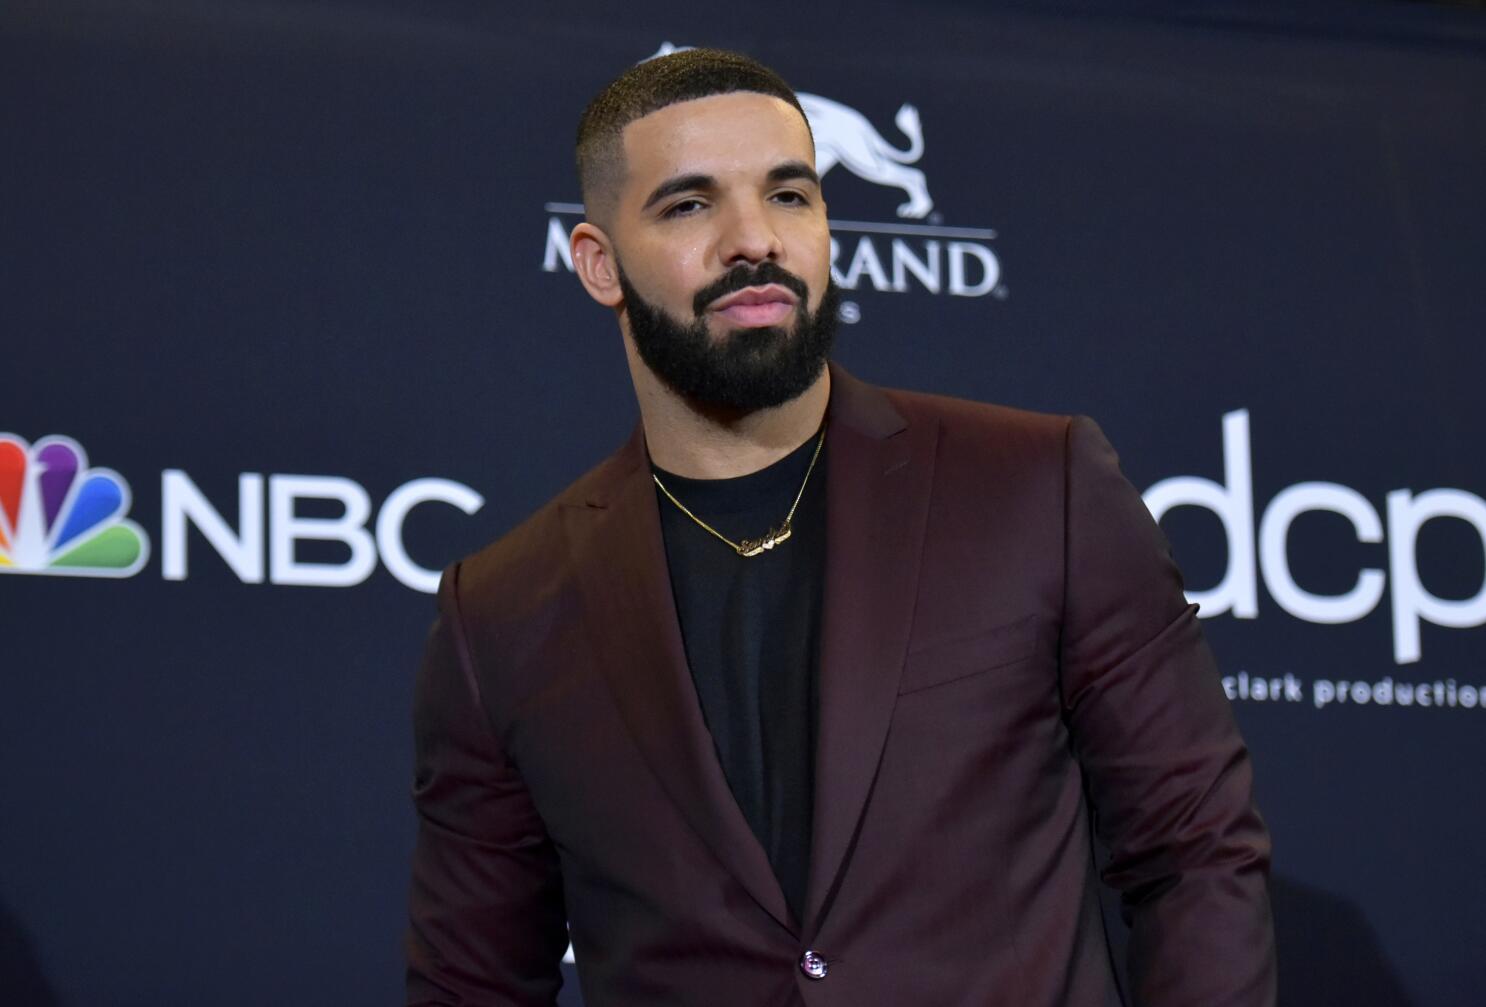 Drake Gets New Tattoo in Honour of Late Friend Virgil Abloh! (View Pic)